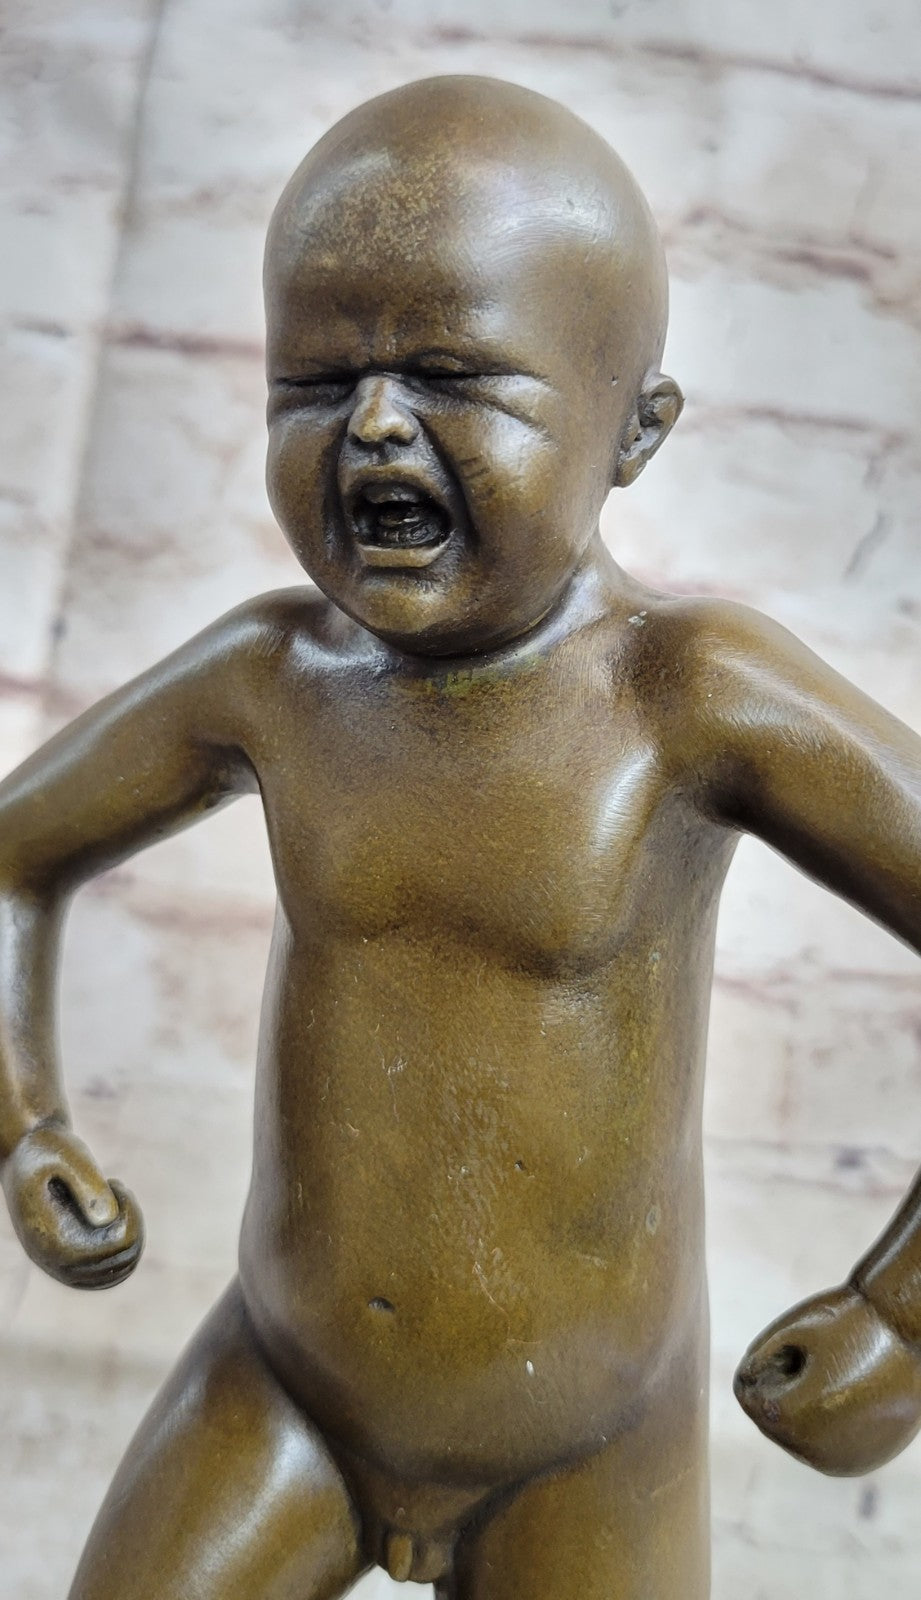 Art Deco Hand Made Baby crying Bronze sculpture by Lost wax Method Statue DEAL